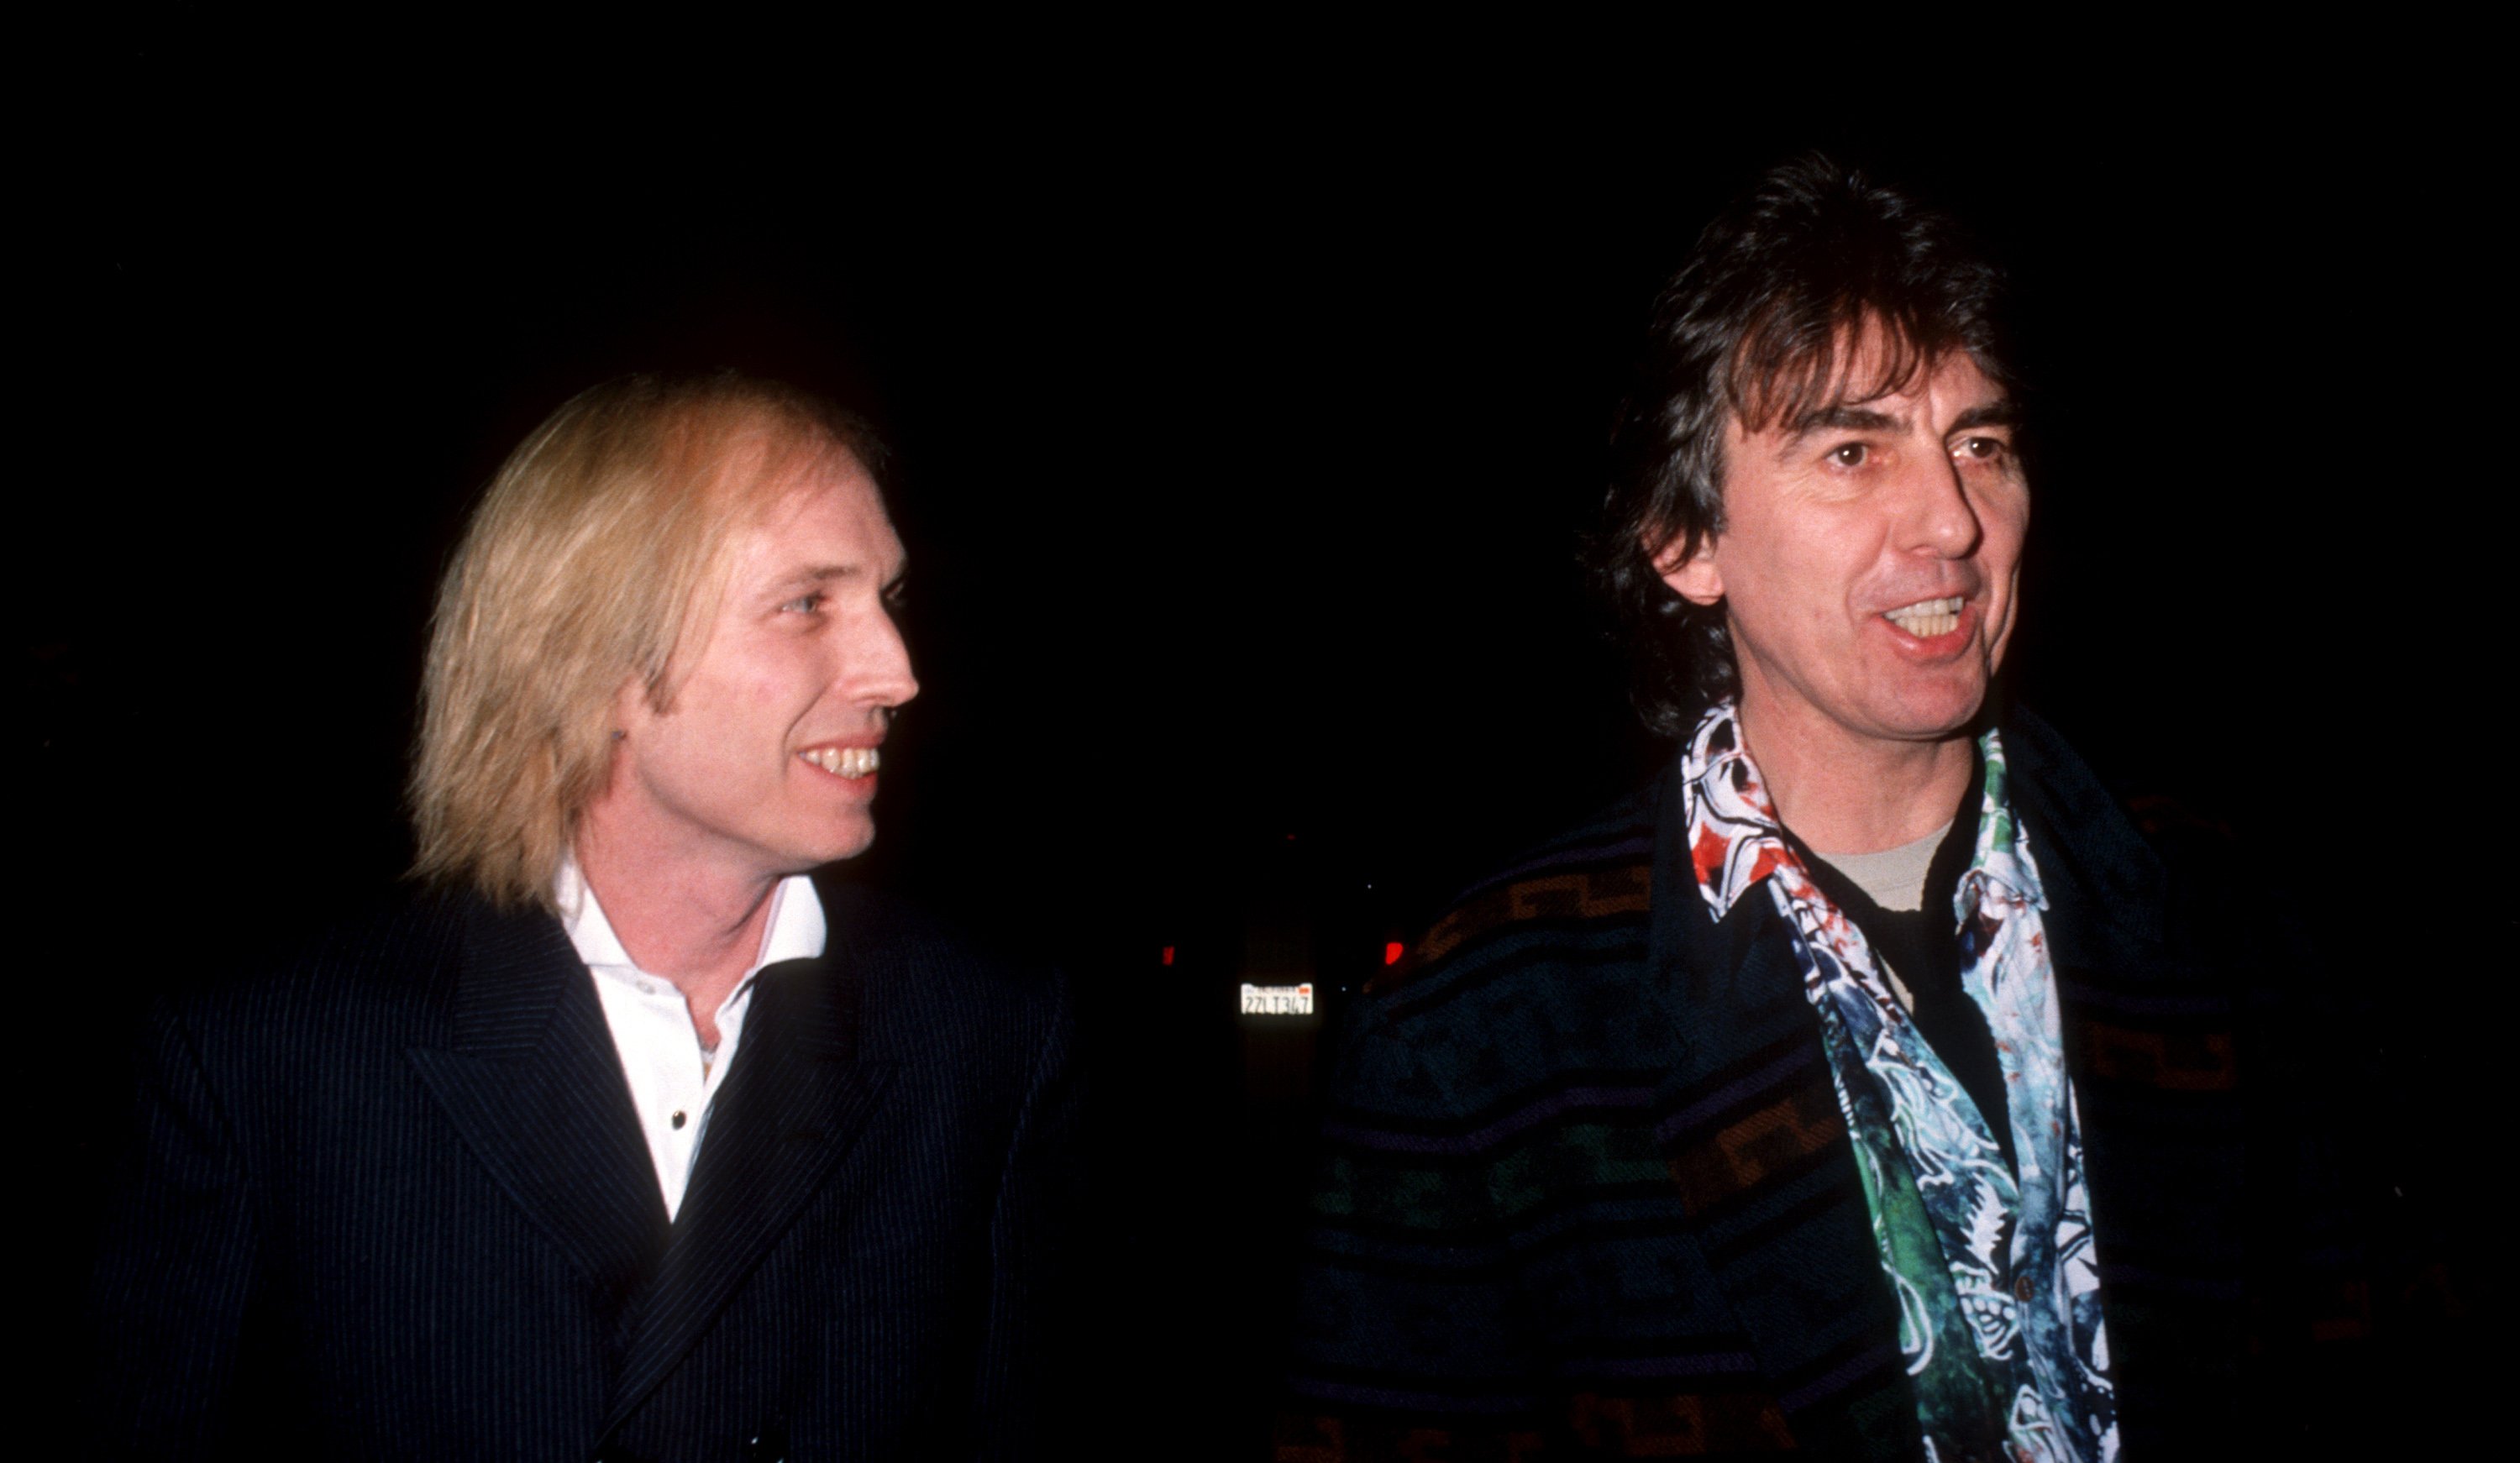 Tom Petty and George Harrison wear black jackets and walk outside. George Harrison helped convince Tom Petty to release 'I Won't Back Down.'